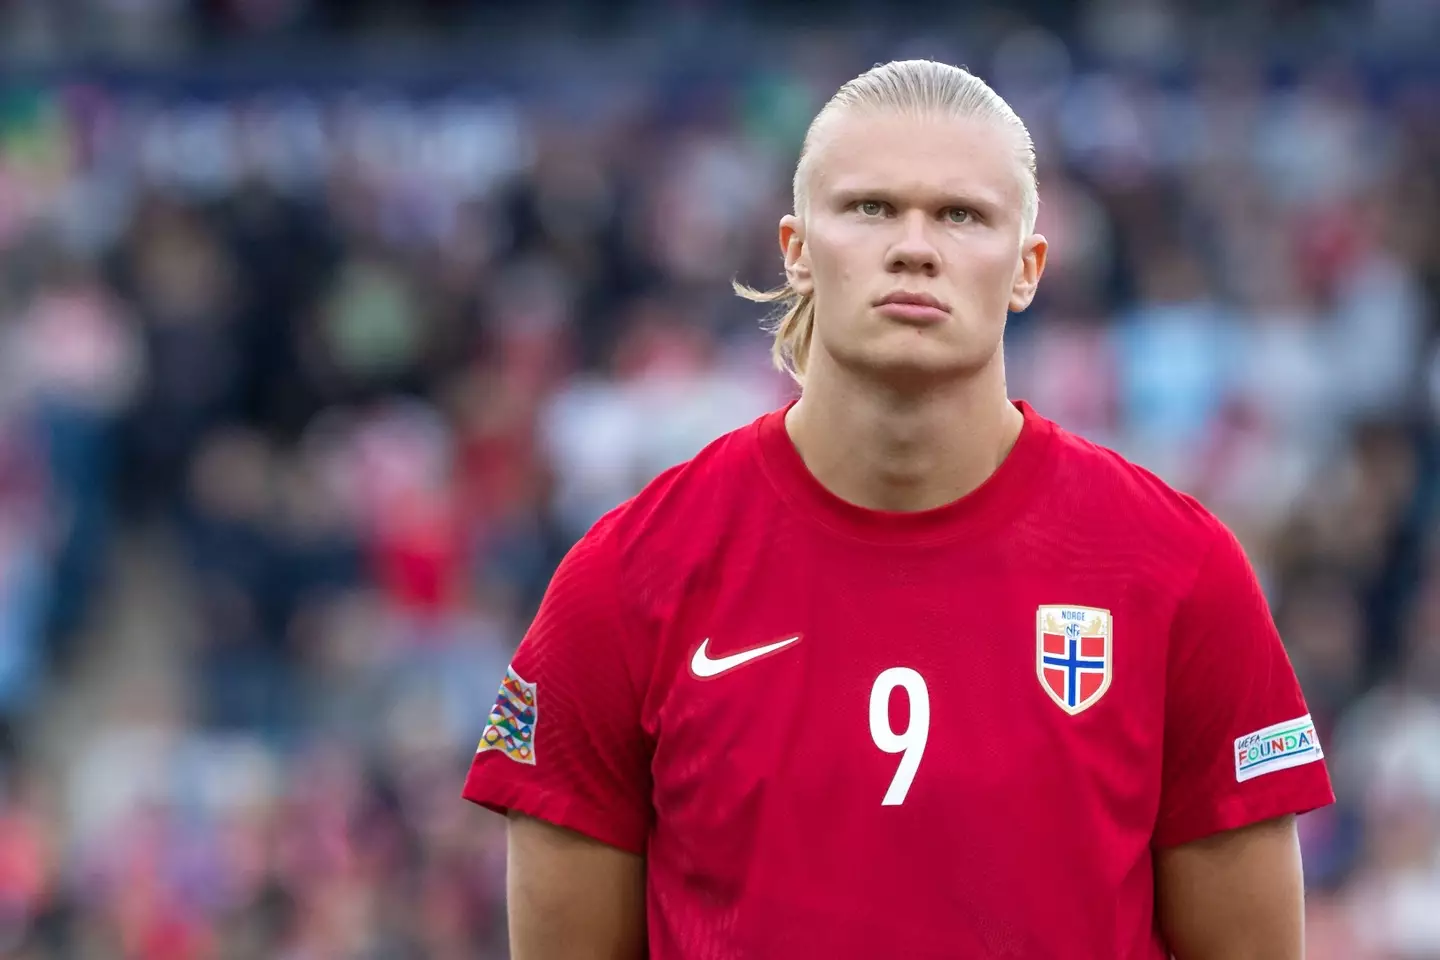 Erling Haaland will link-up with his Manchester City teammates soon. (Image: Alamy)